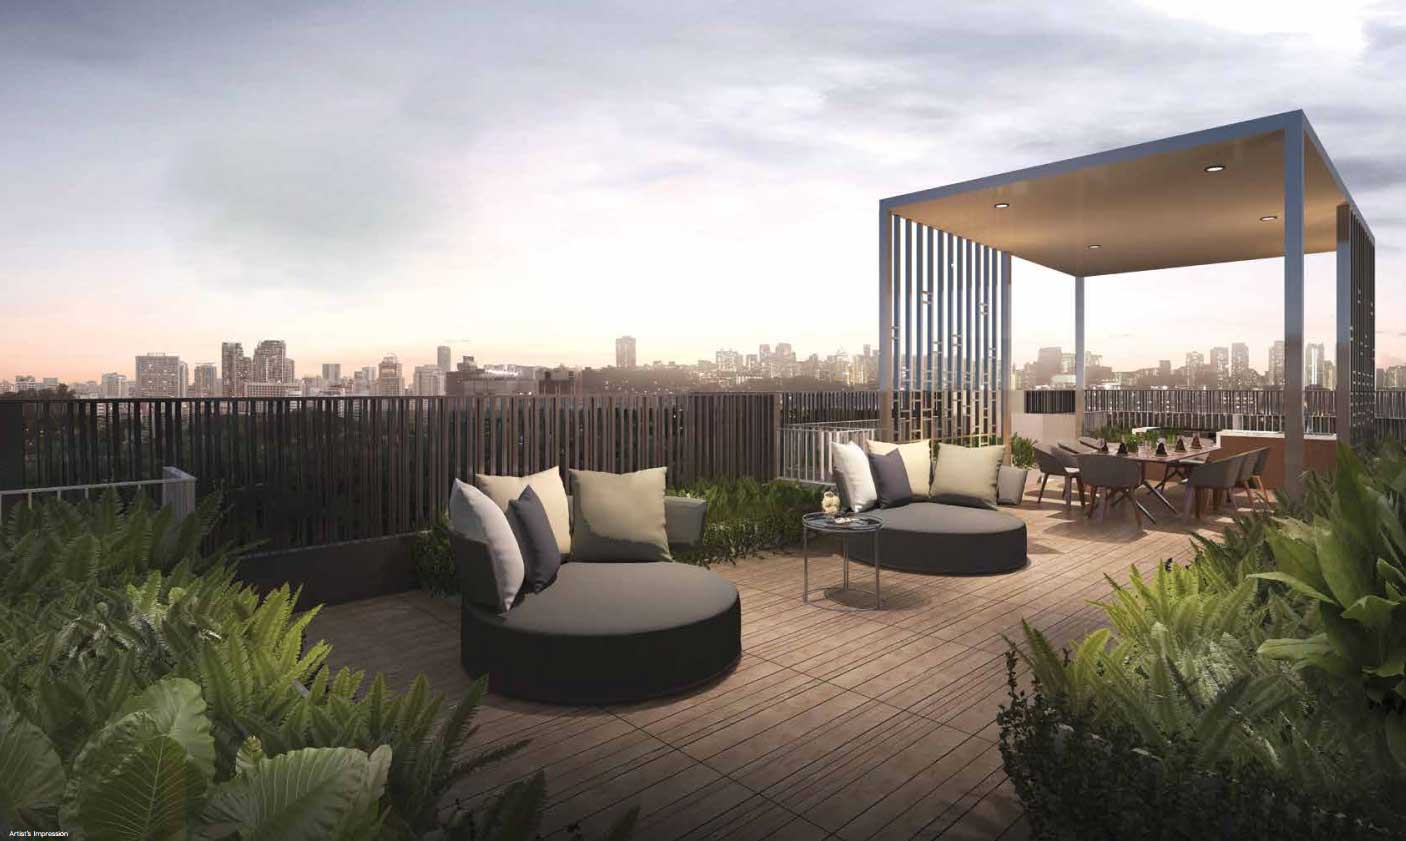 Roof Terrace at Urban Treasures offers a beautiful skyline view